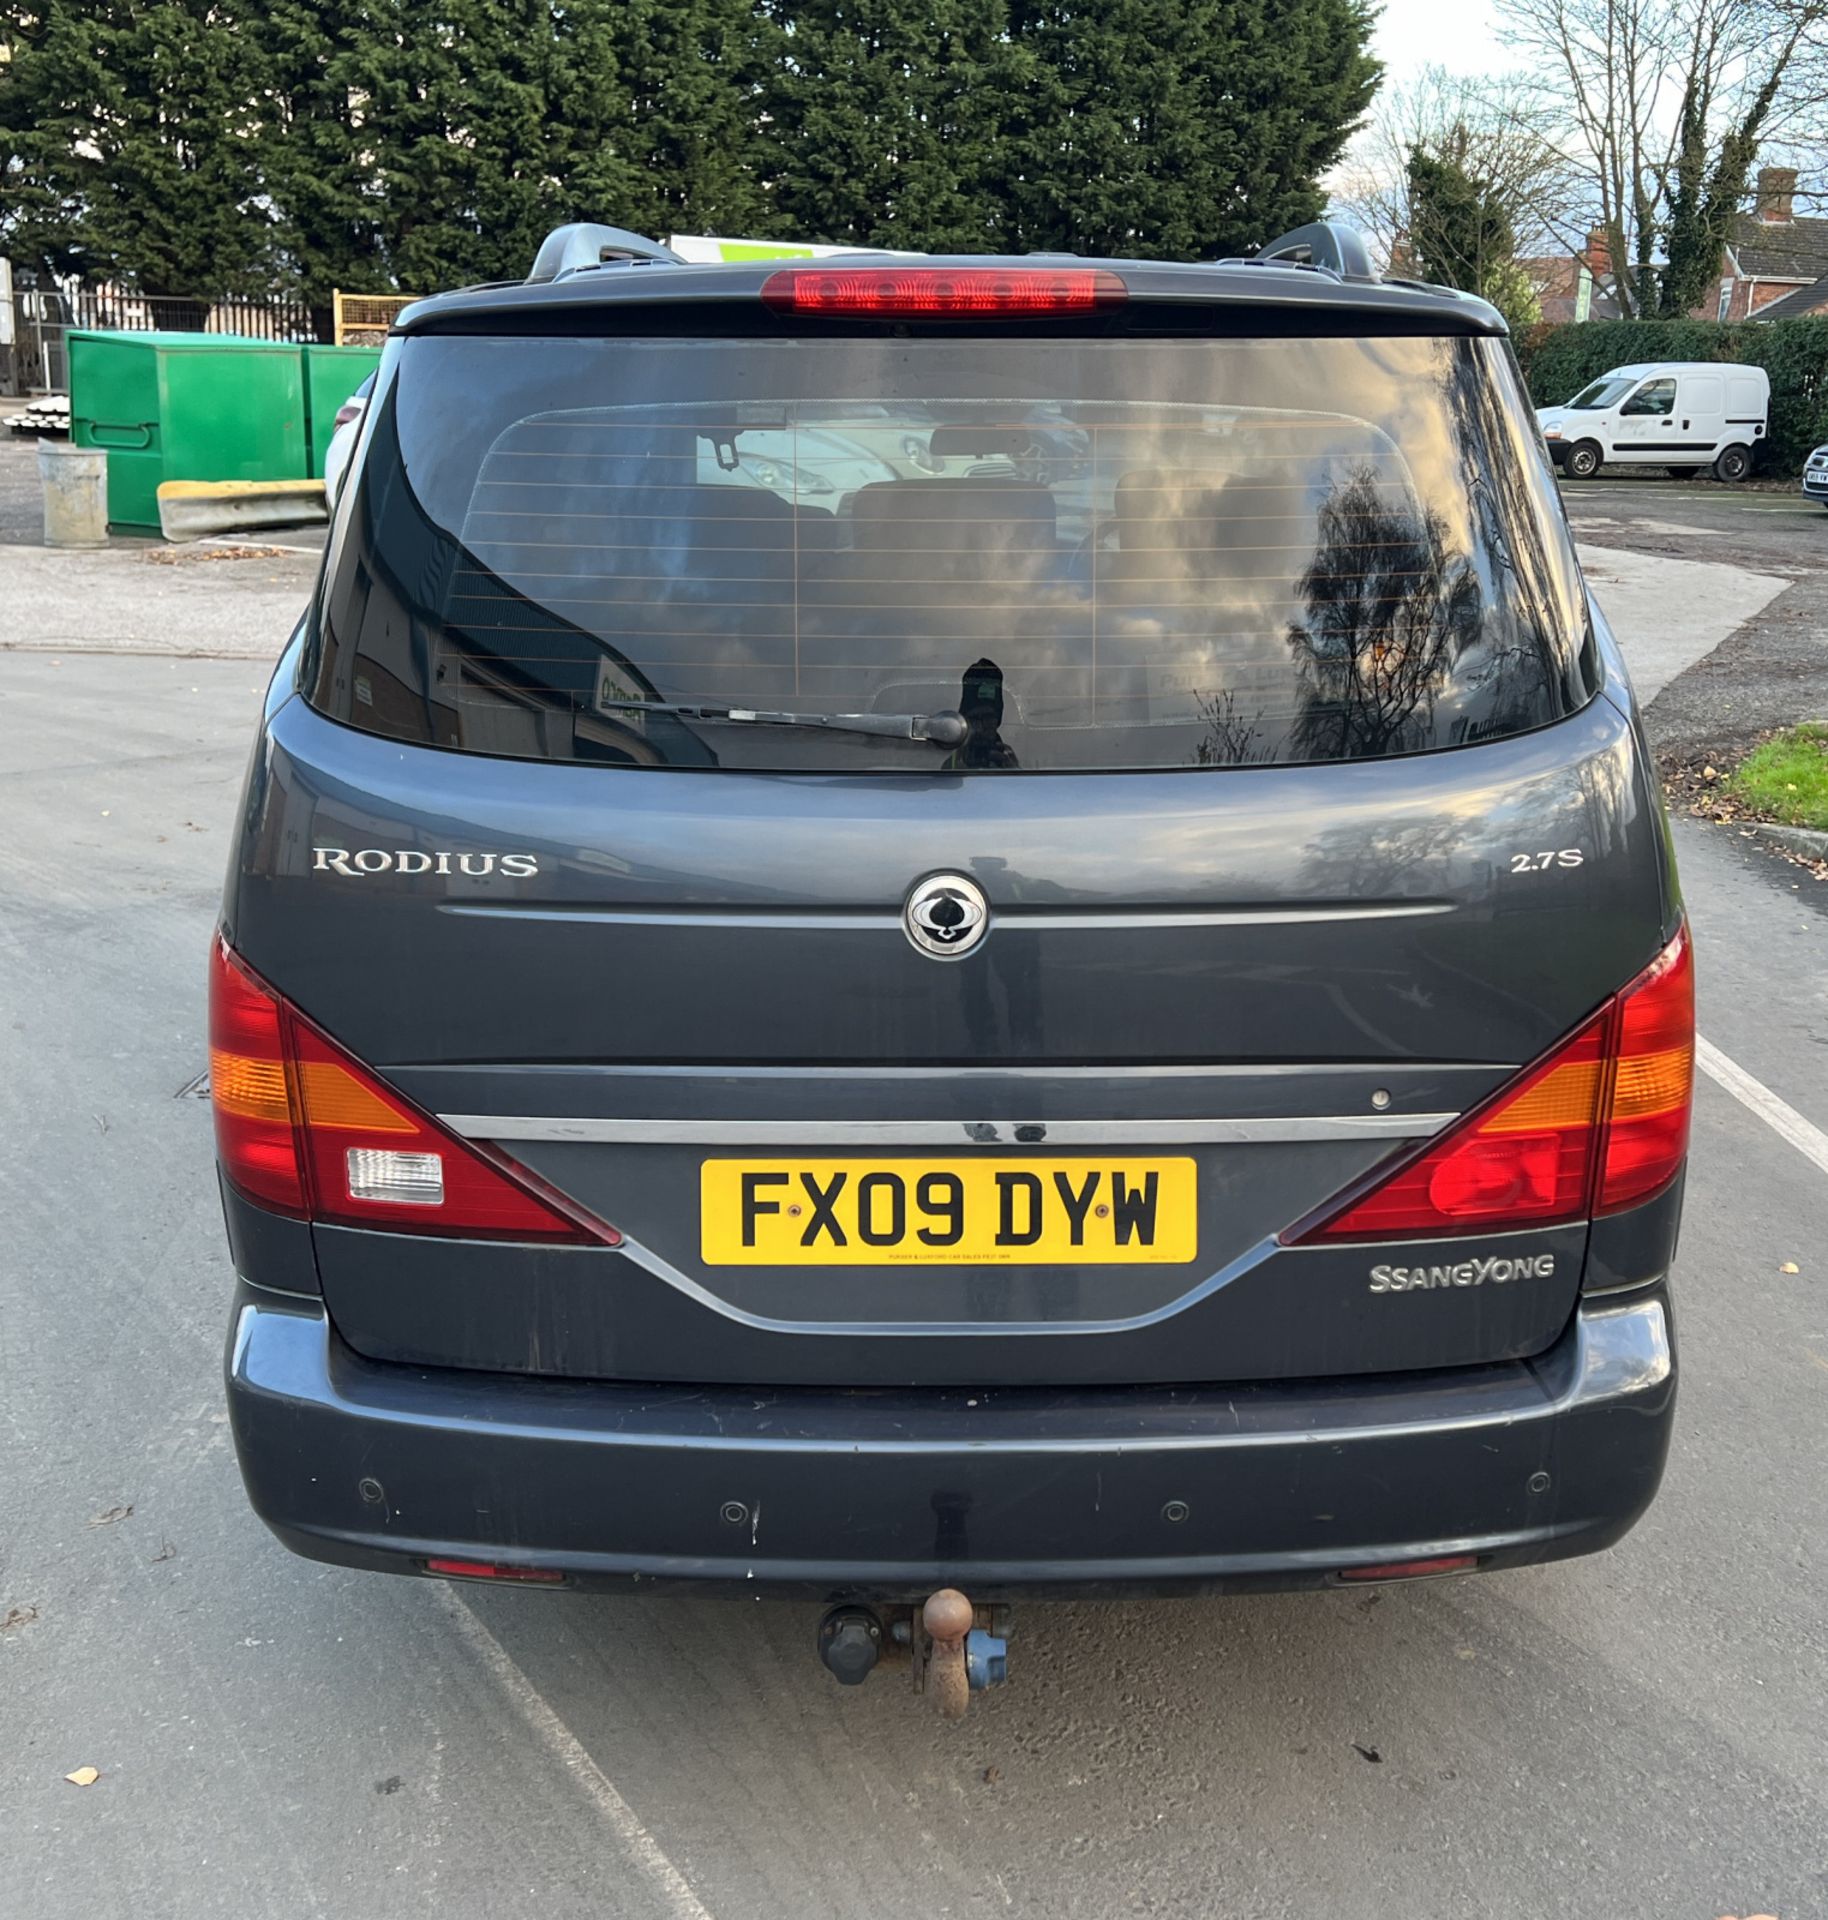 Ssangyong Rodius - 7 seater - 2.7L Mercedes engine - Please see description - Image 6 of 33